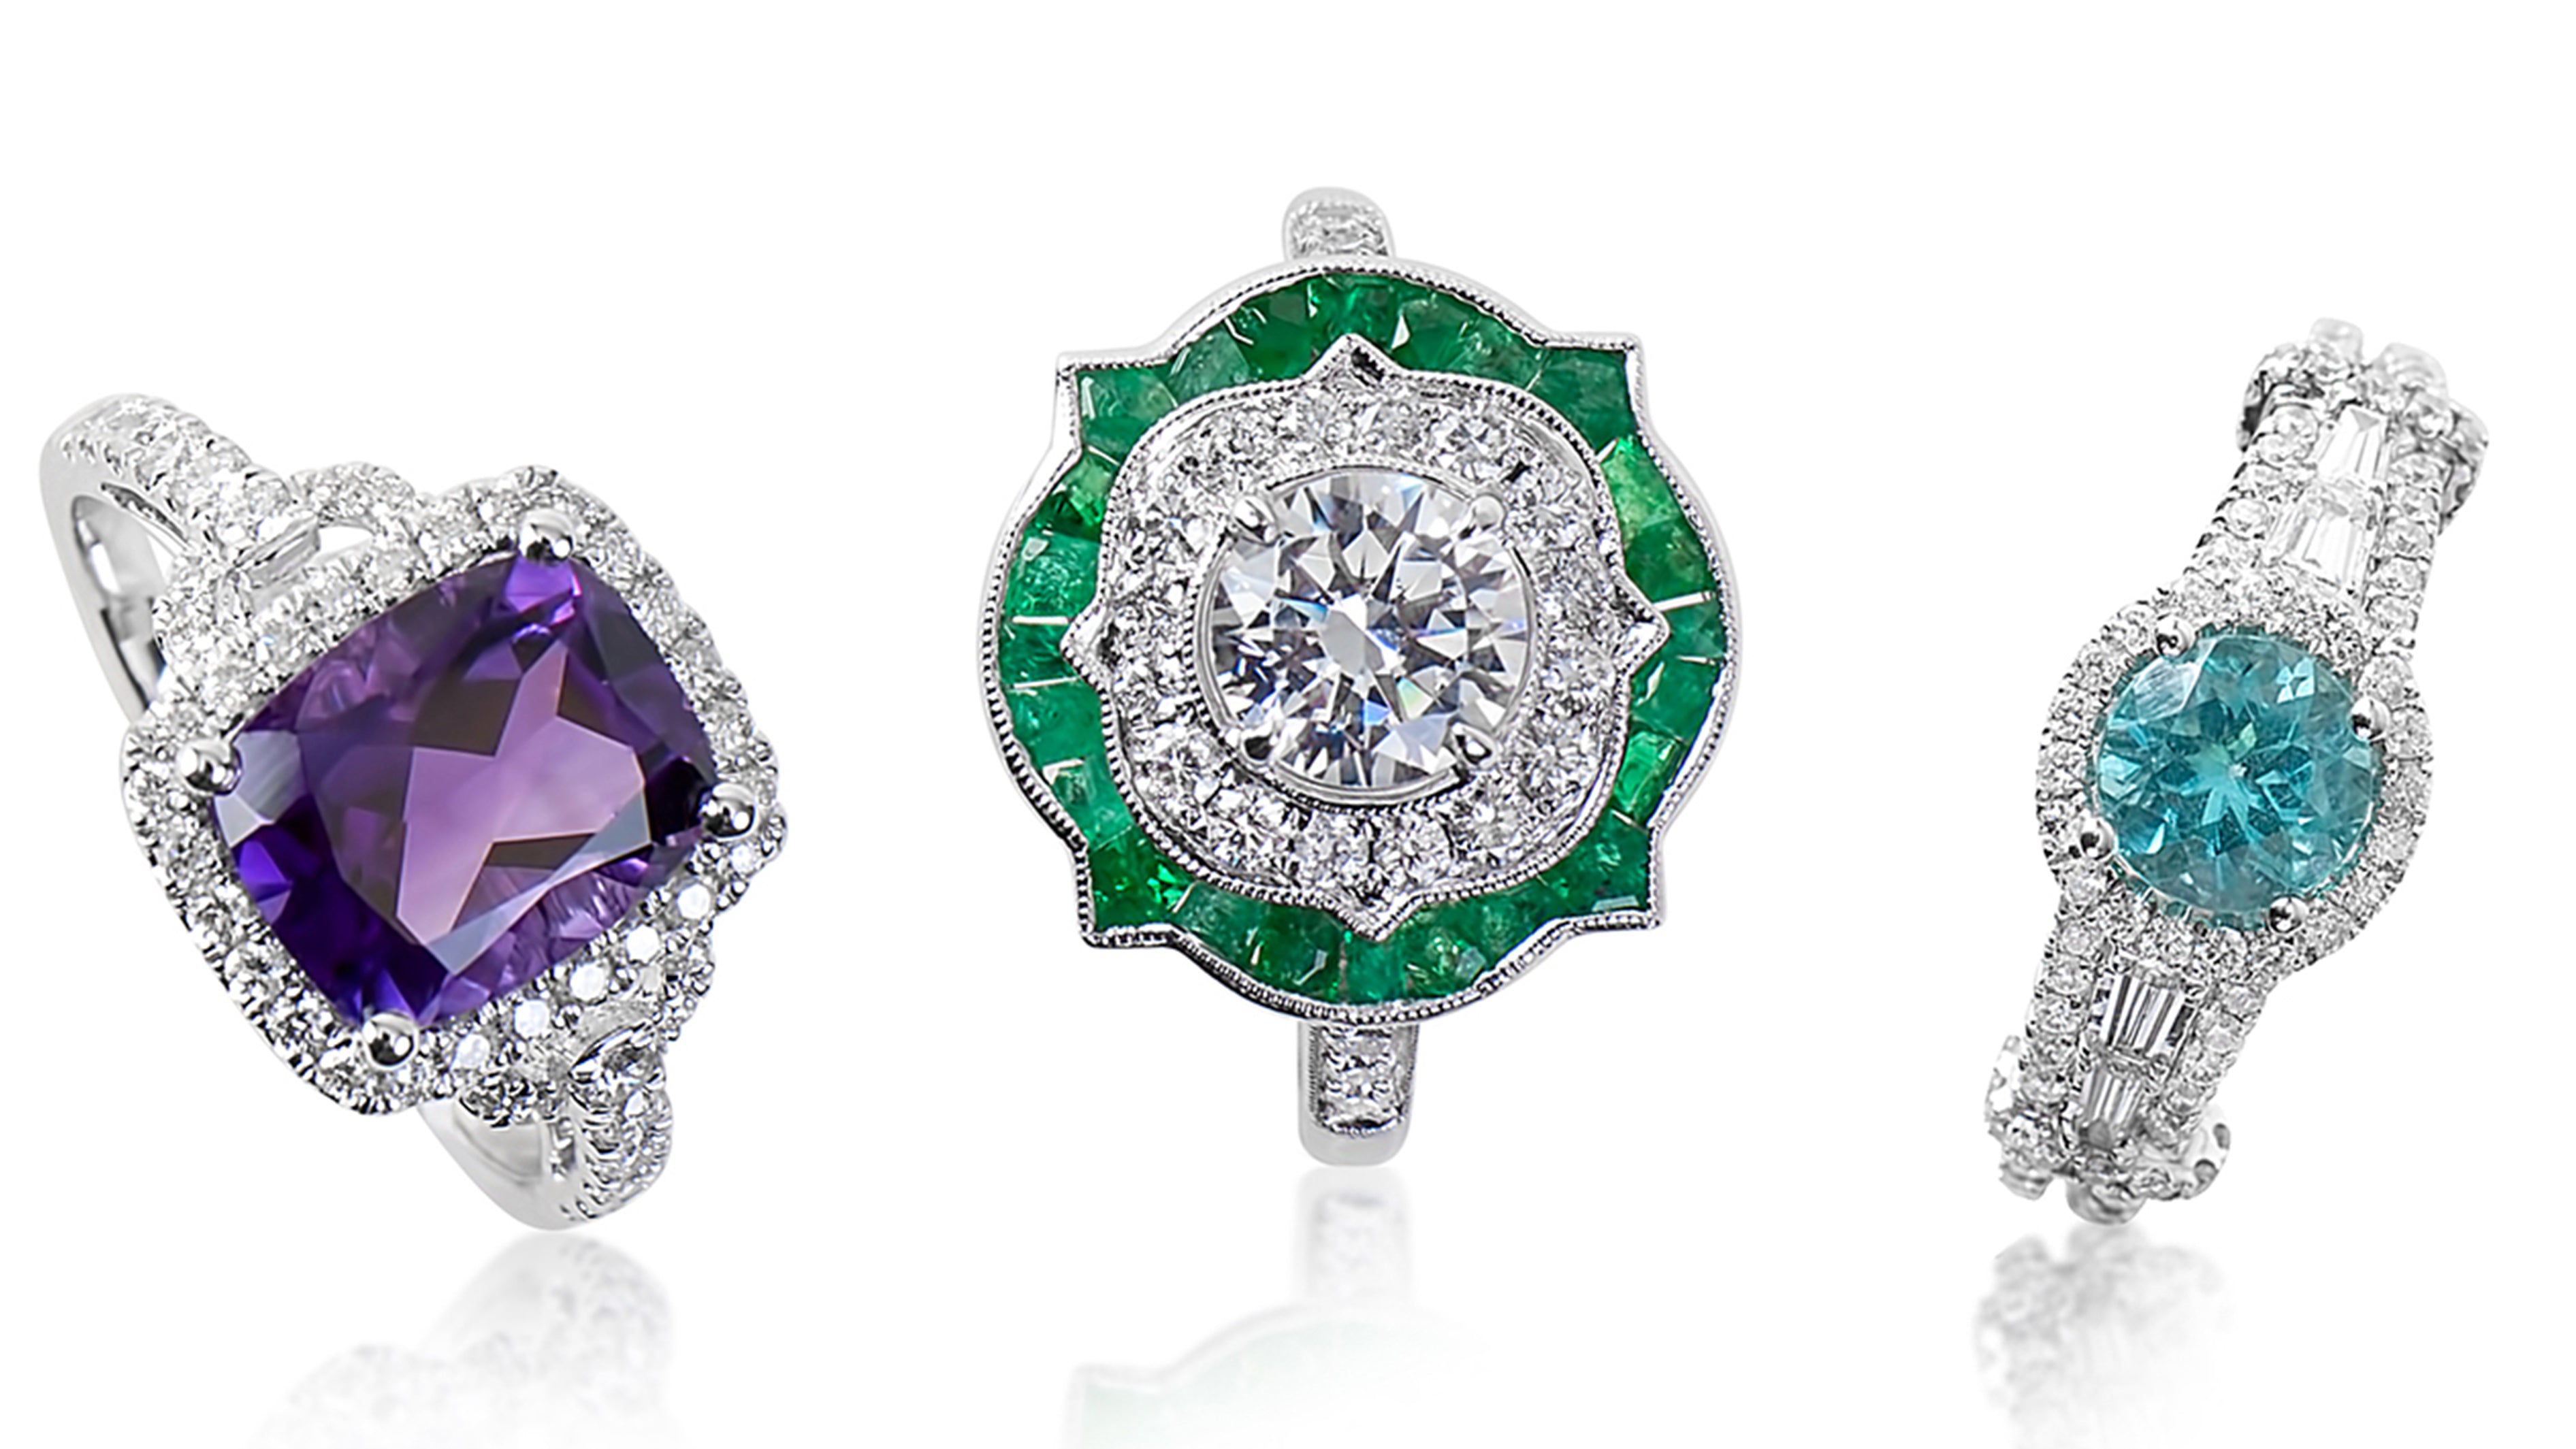 Gemstone Rings at the Jewelers Vault.